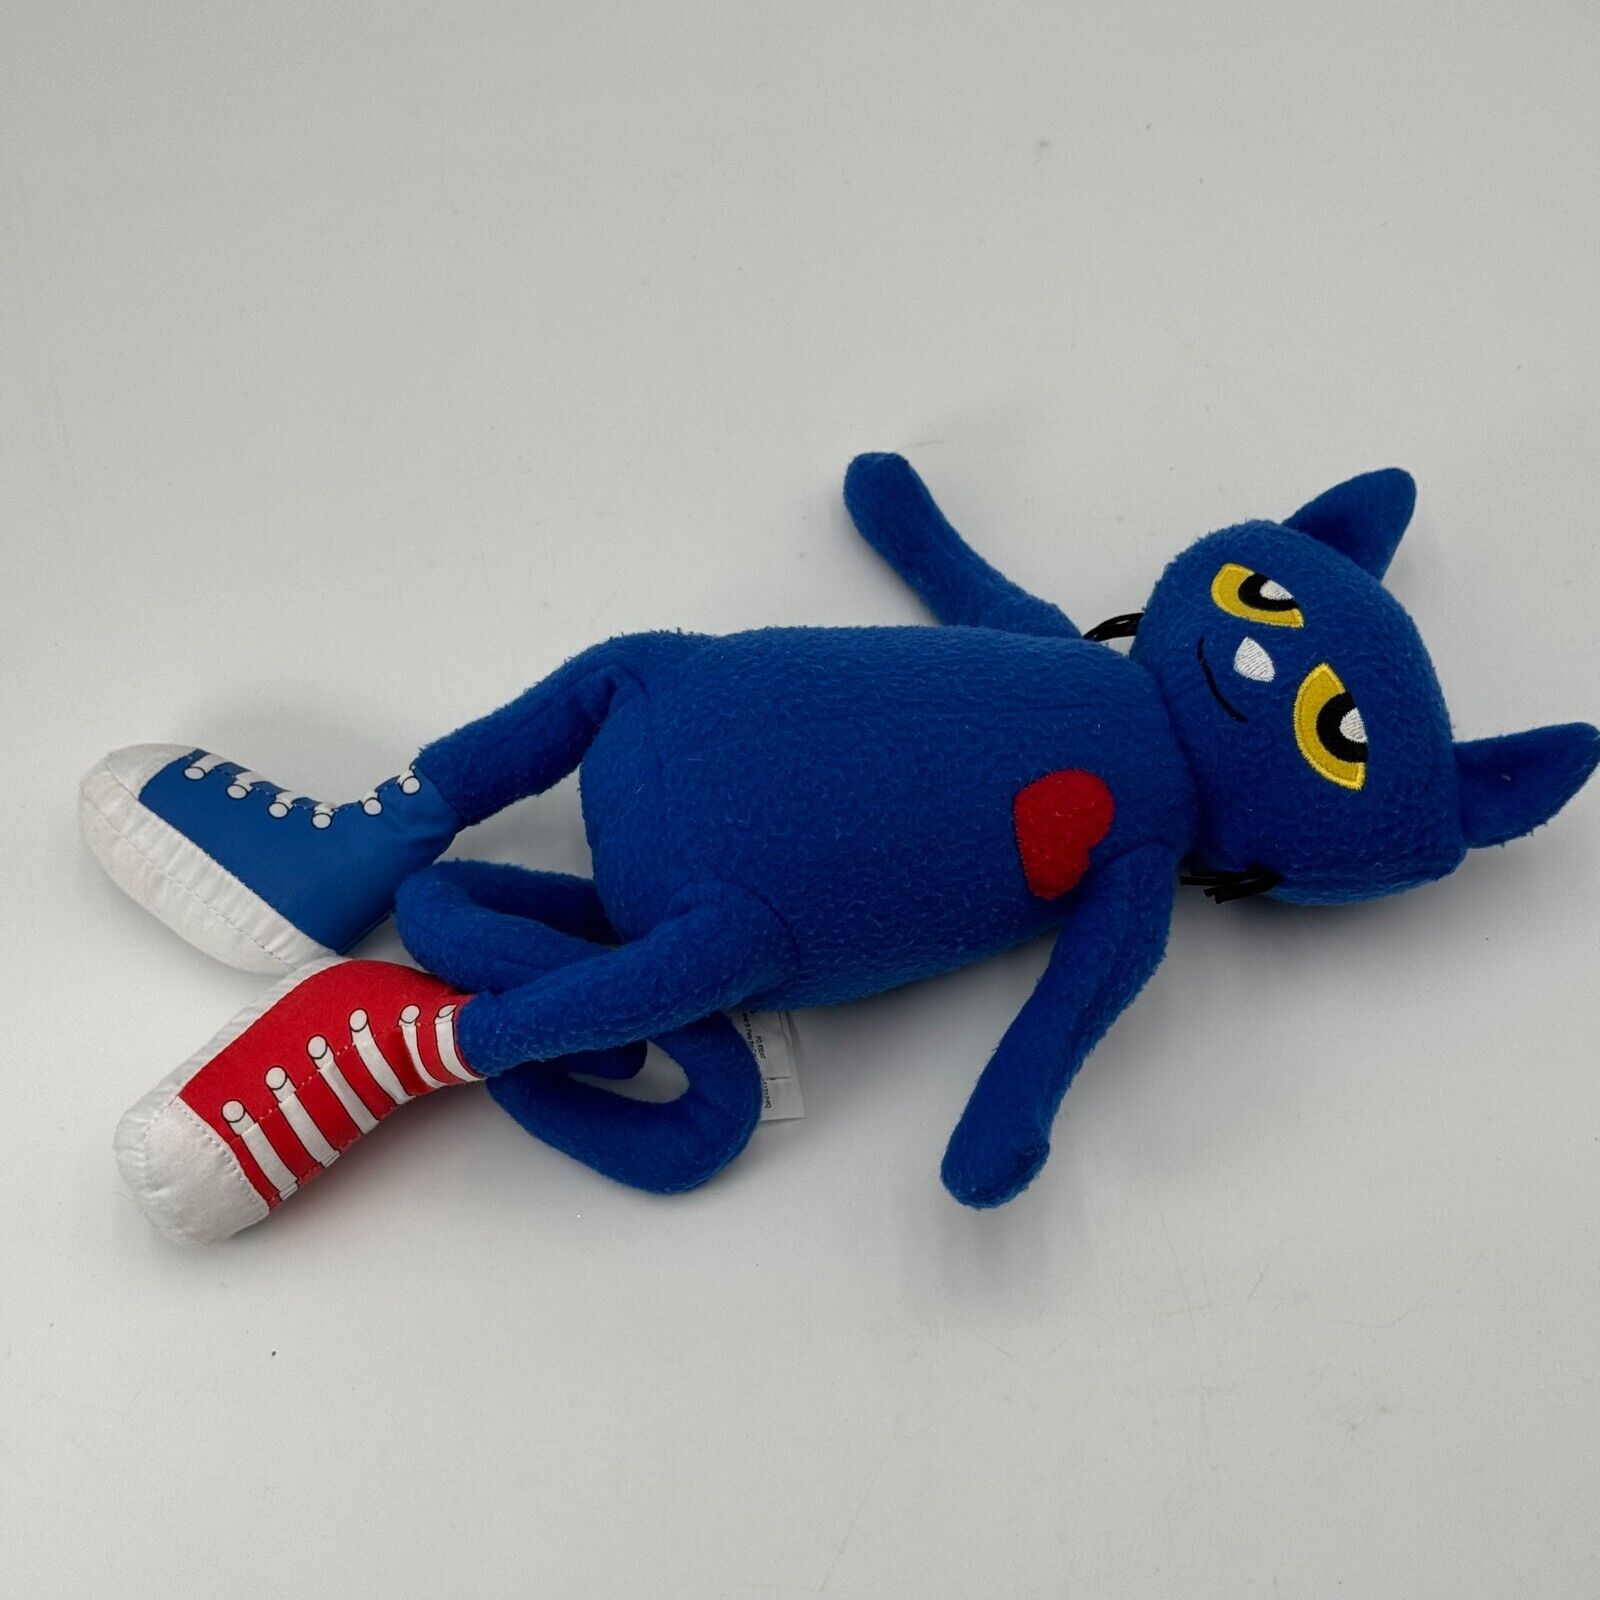 Pete the Cat 13" Plush Red Heart Shoe Curly Tail Blue Cat James Dean Merrymakers